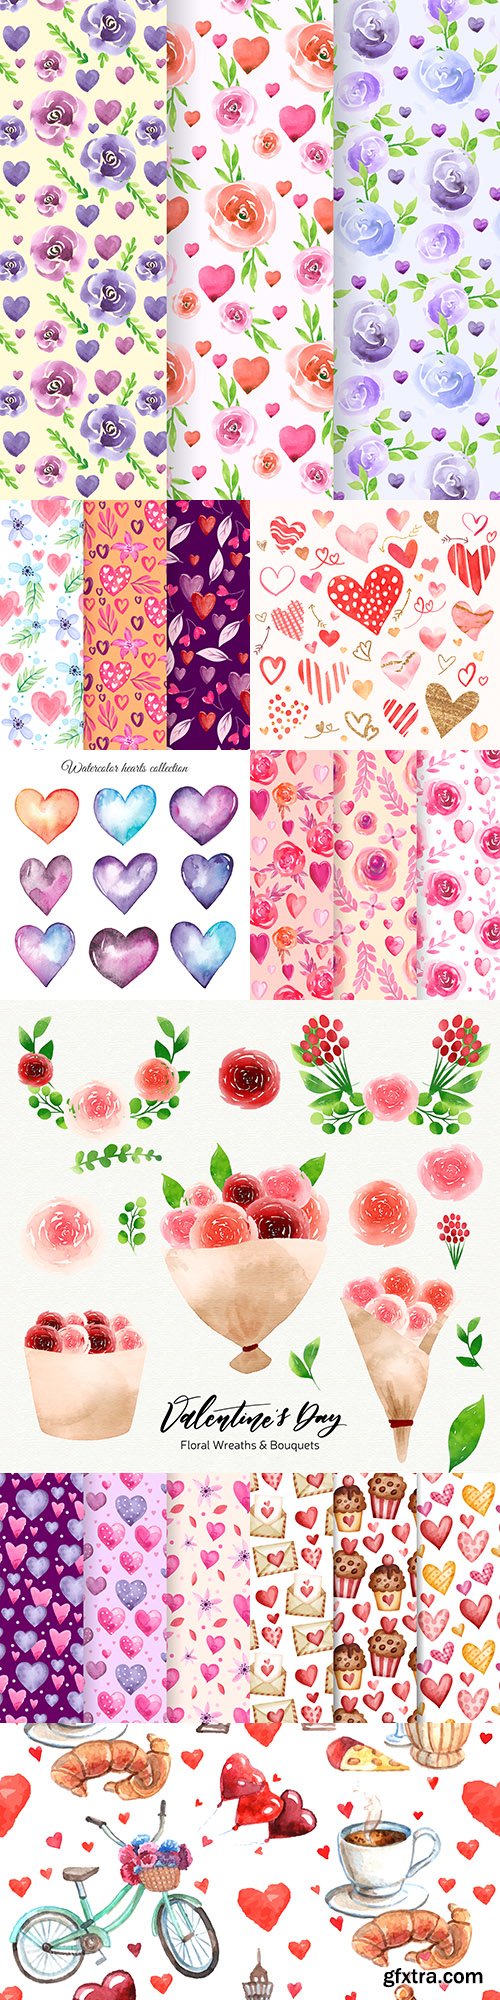 Valentine\'s Day romantic background and pattern elements